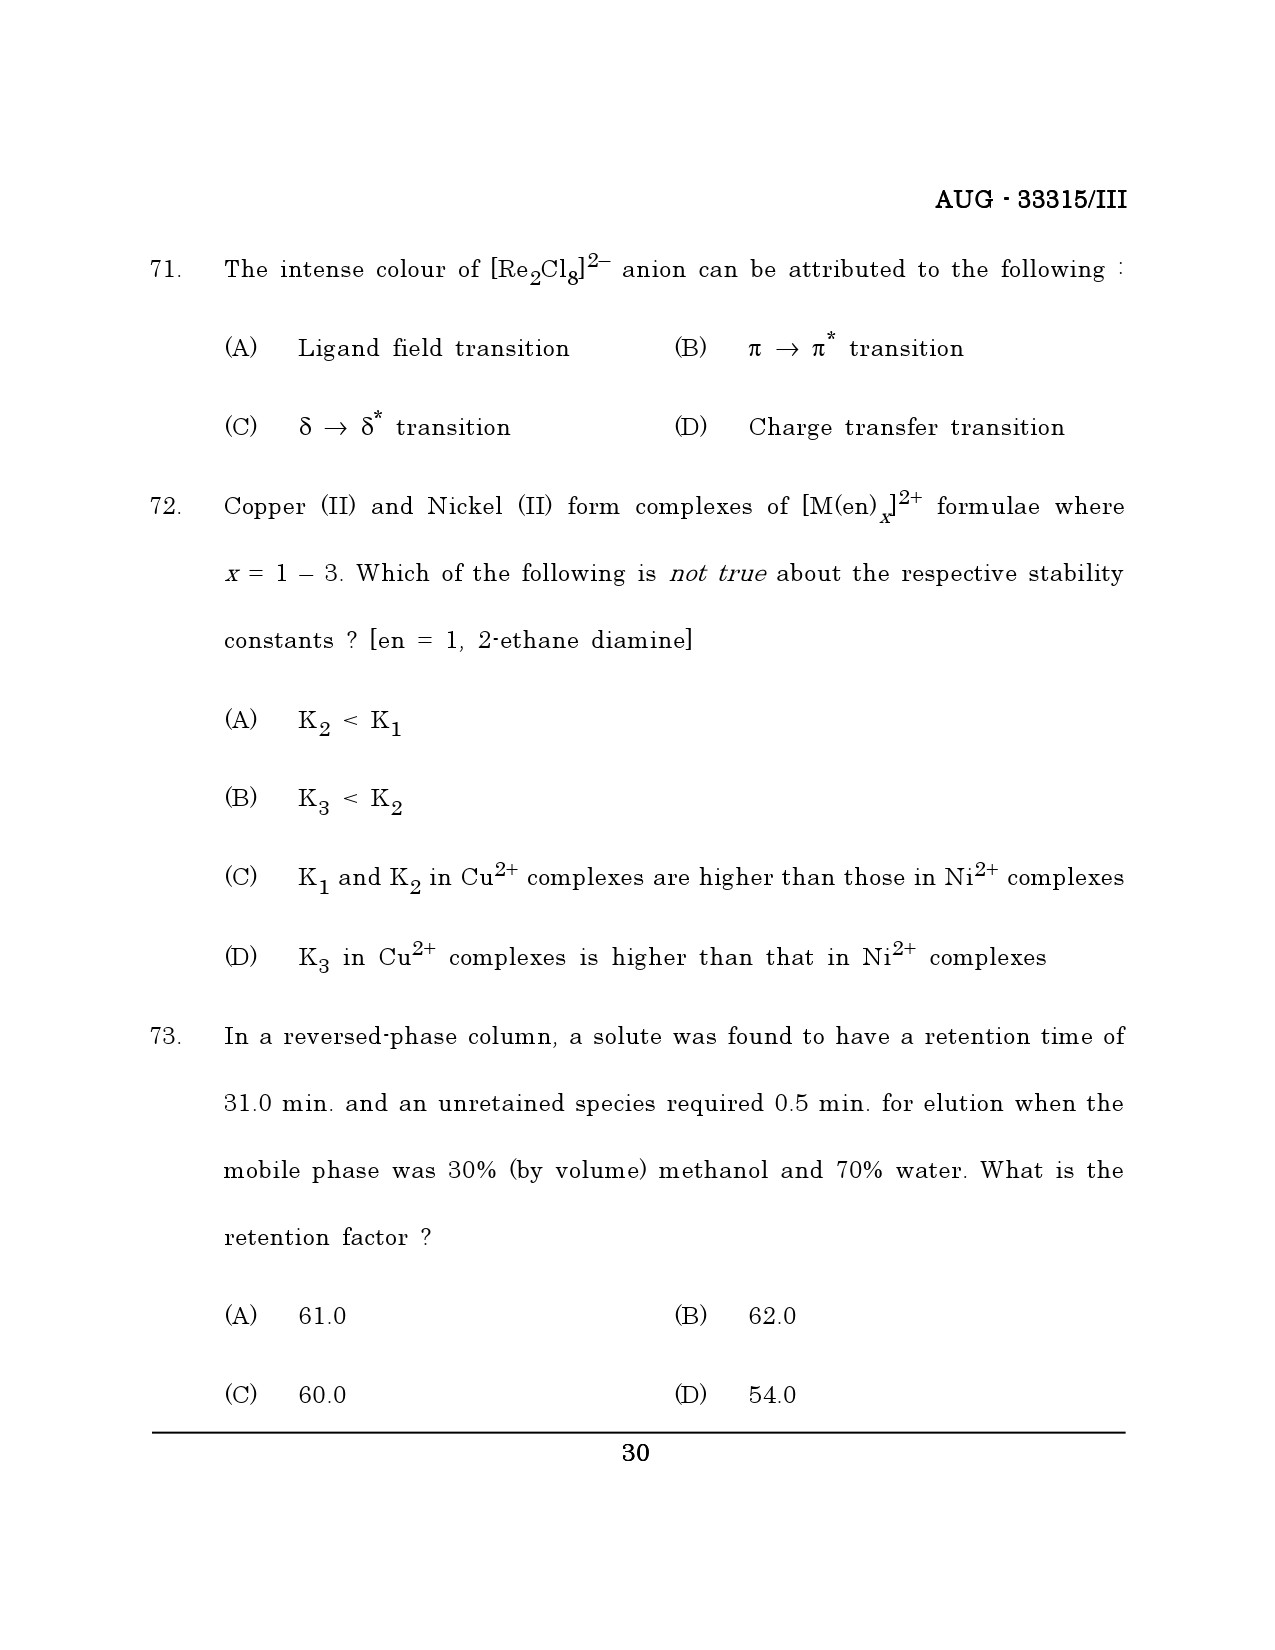 Maharashtra SET Chemical Sciences Question Paper III August 2015 29